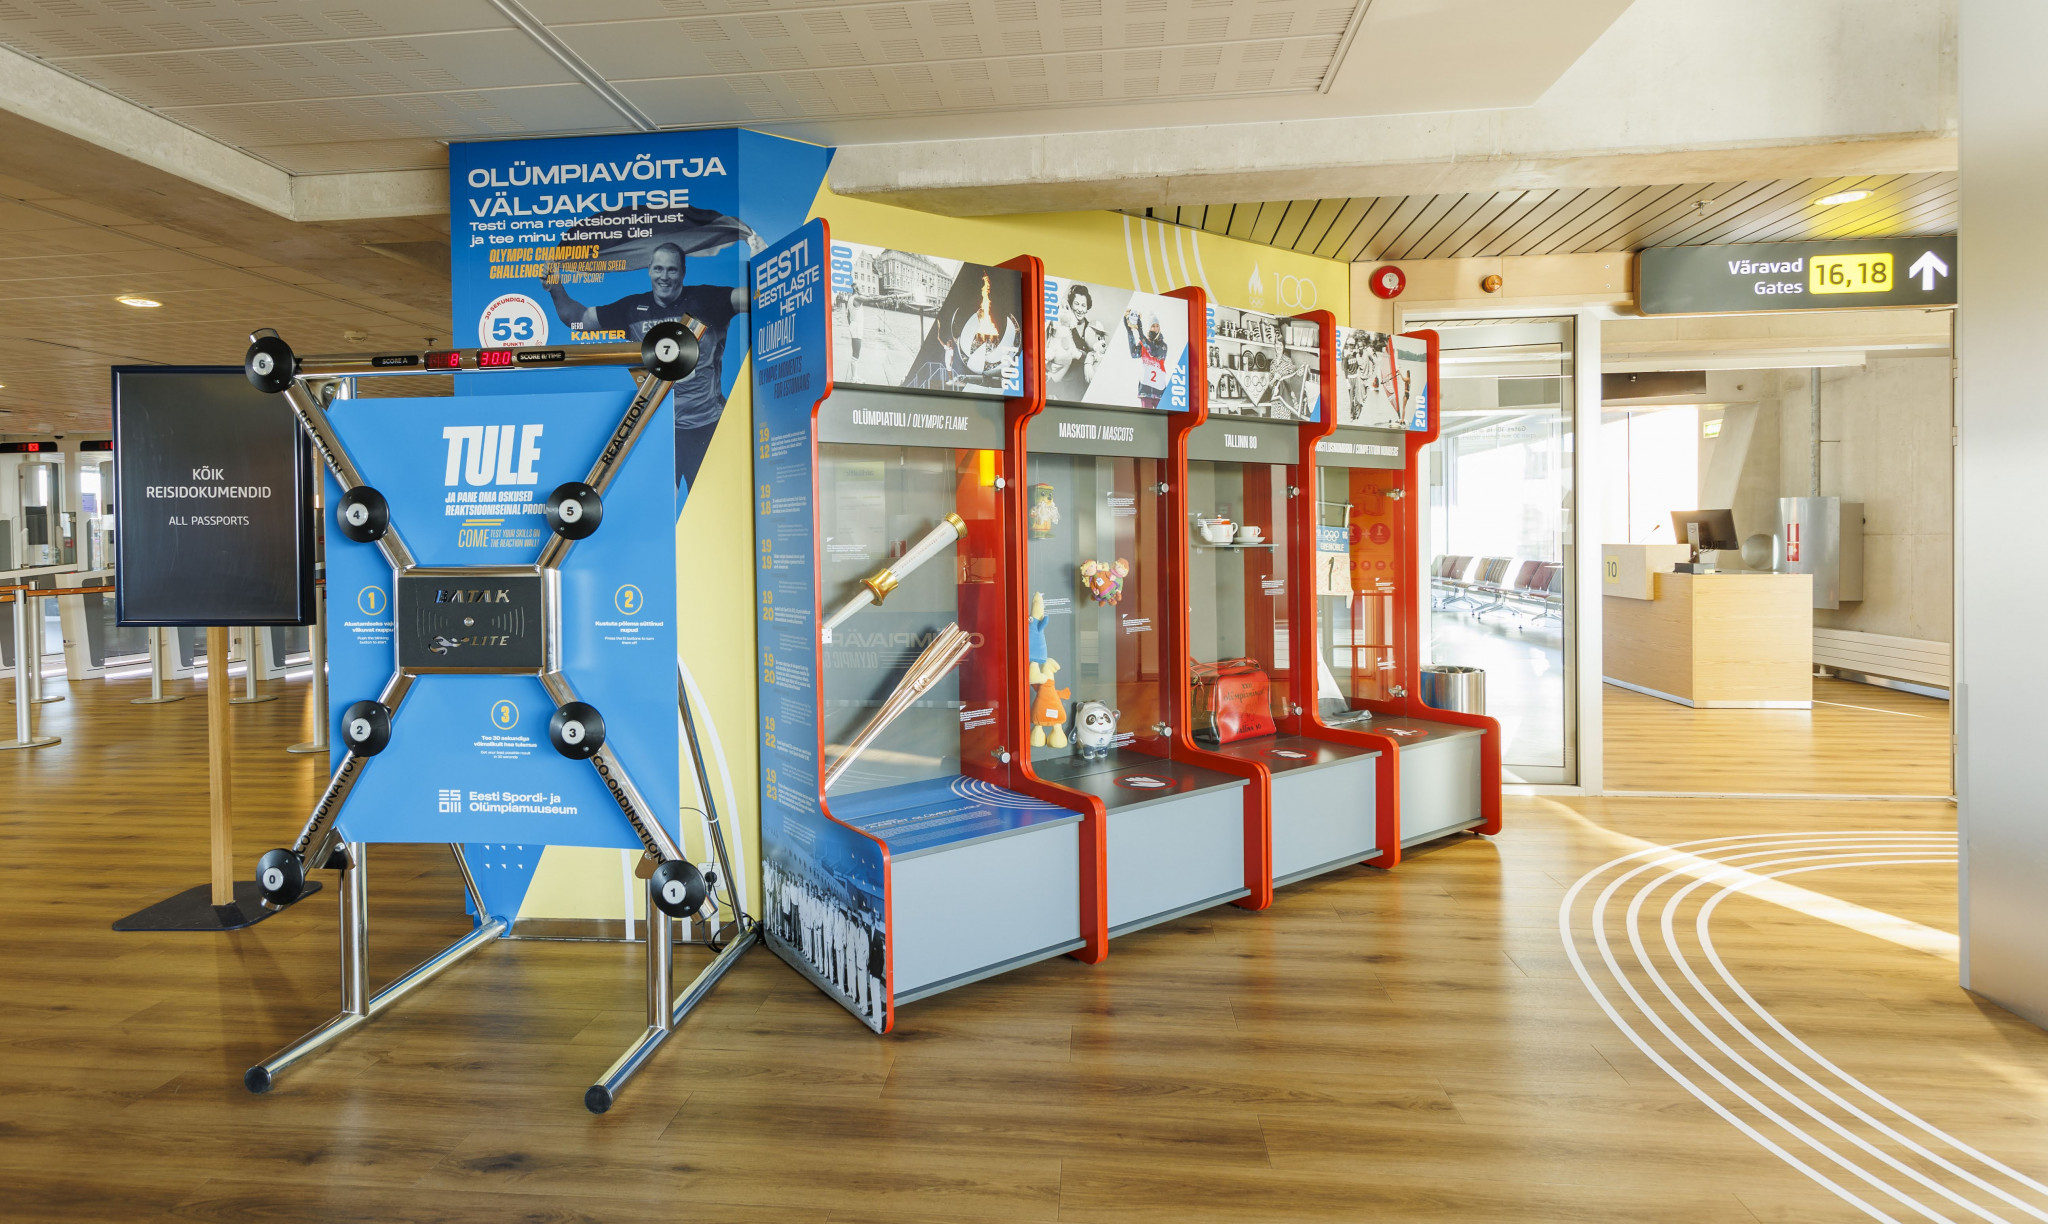 The Estonian museum at the airport is a mixture of history and interactive displays ©Estonian Olympic Committee